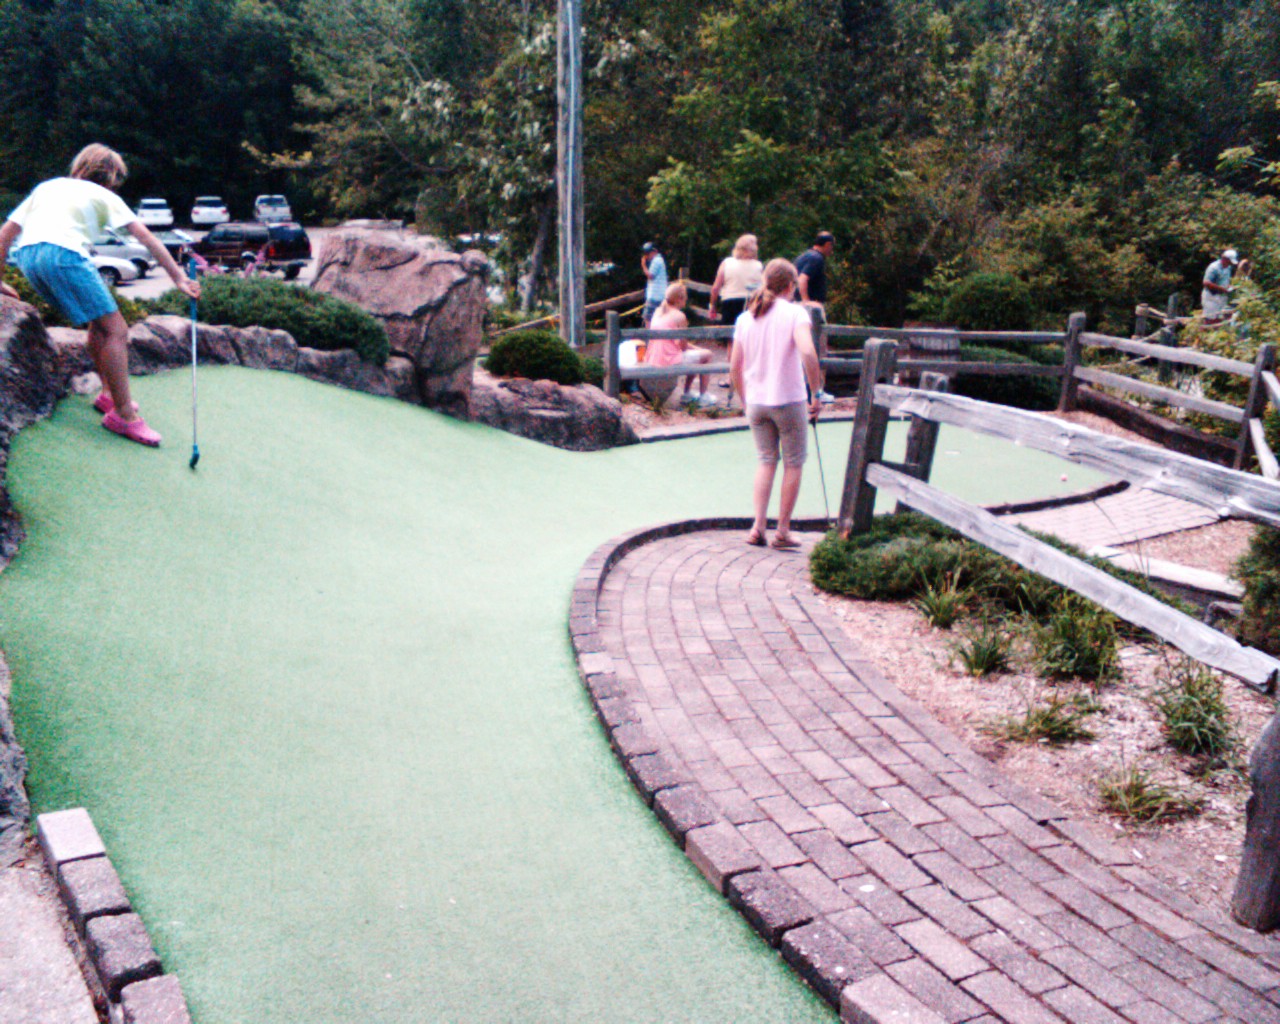 three people at the miniature golf course